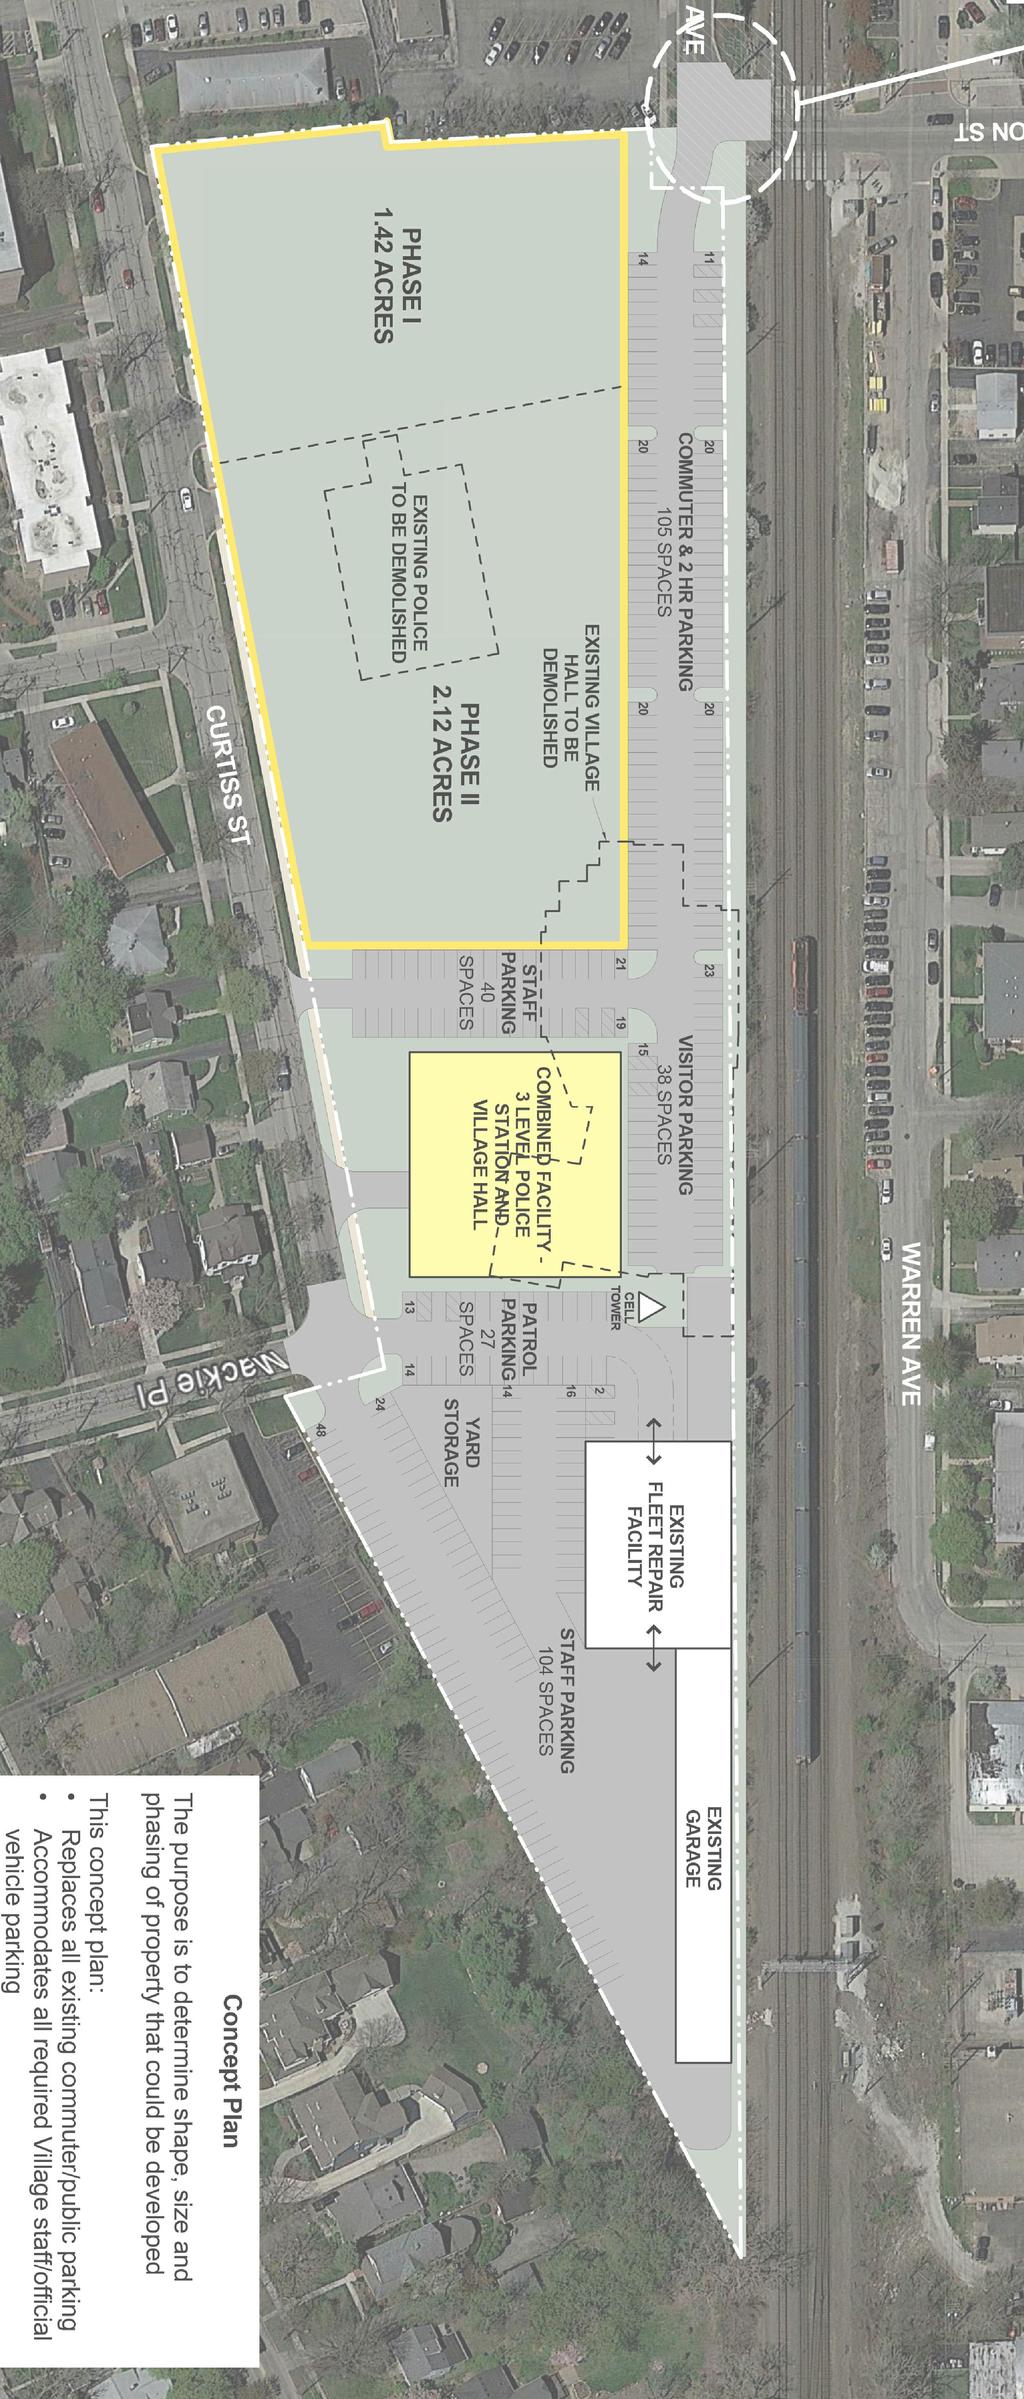 1 PROPOSED SITE PLAN OPTION 2 PROPOSAL FOR CIVIC CENTER PROPERTY,